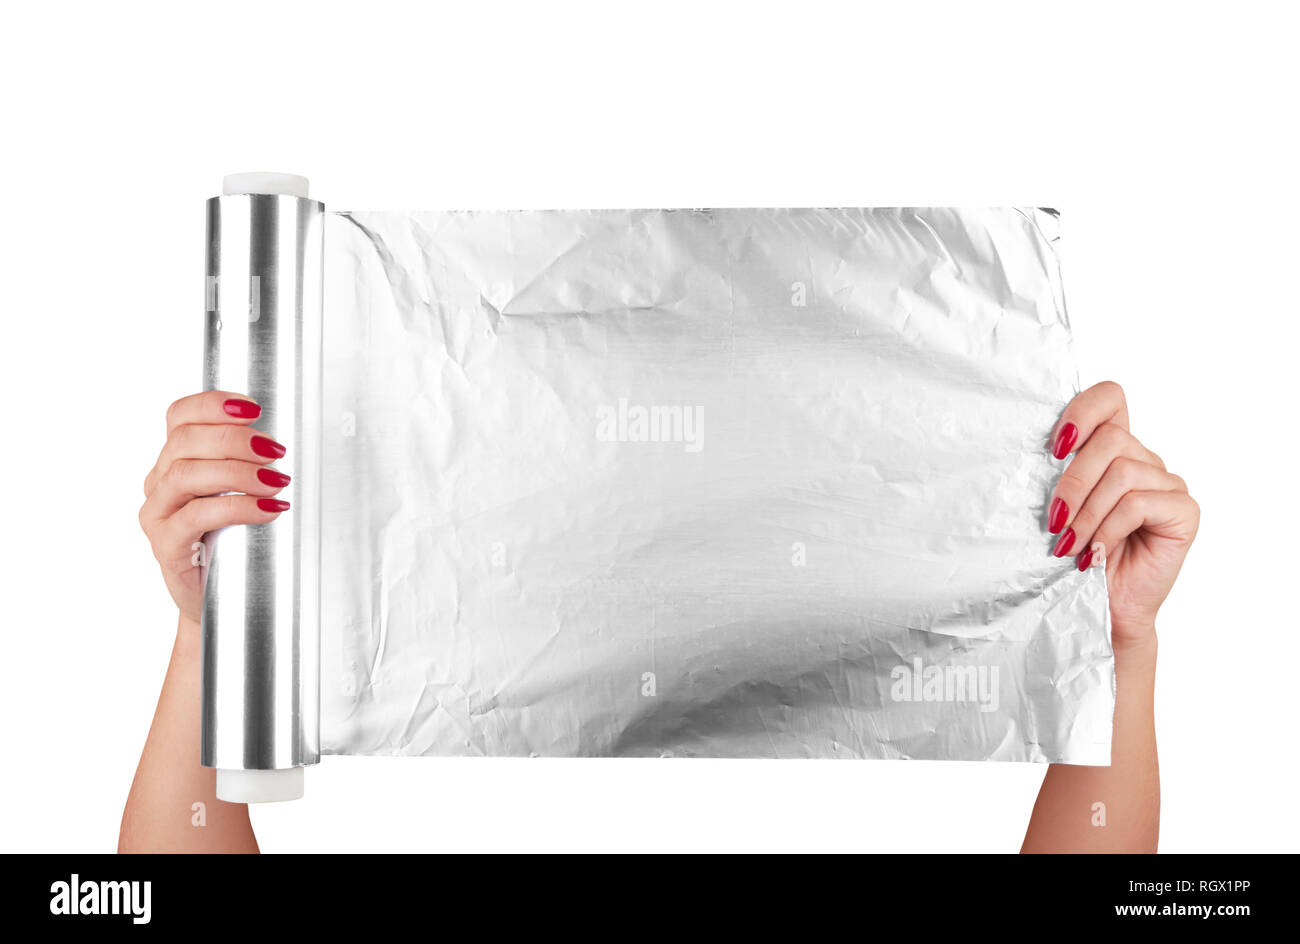 woman holding a roll of aluminum foil Stock Photo